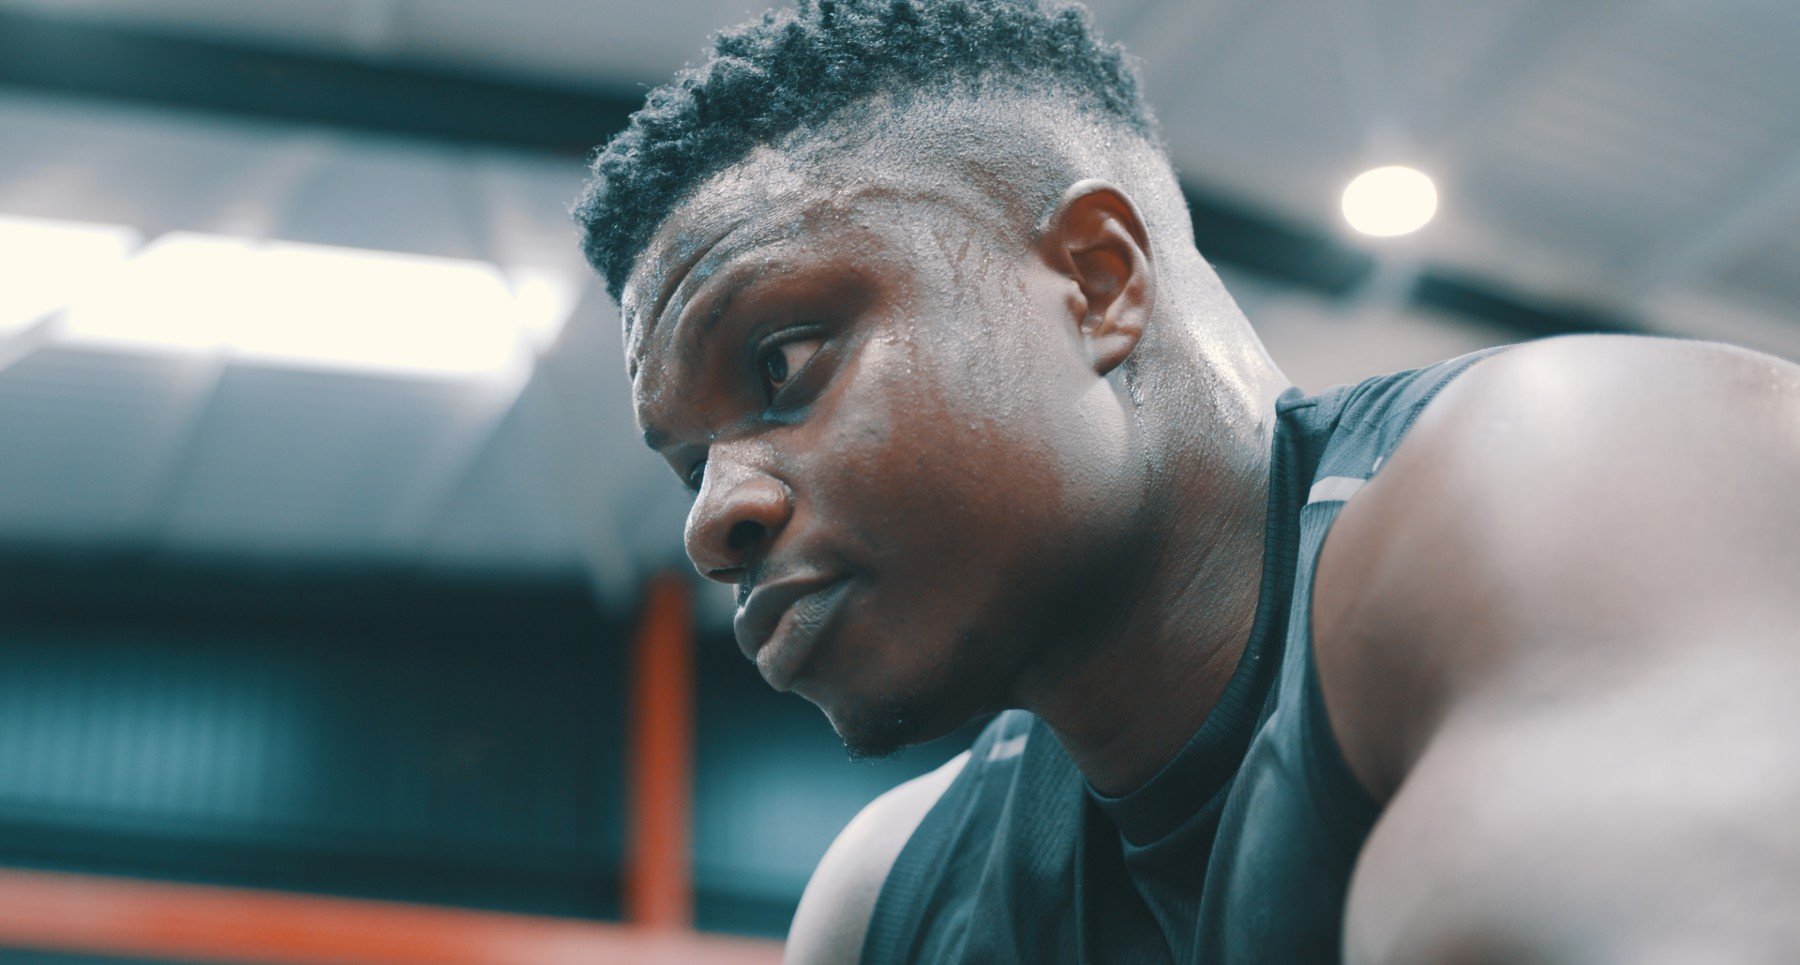 Coping With The Pressures Of Competing | Abou Konate: The Locker Room – Episode 2